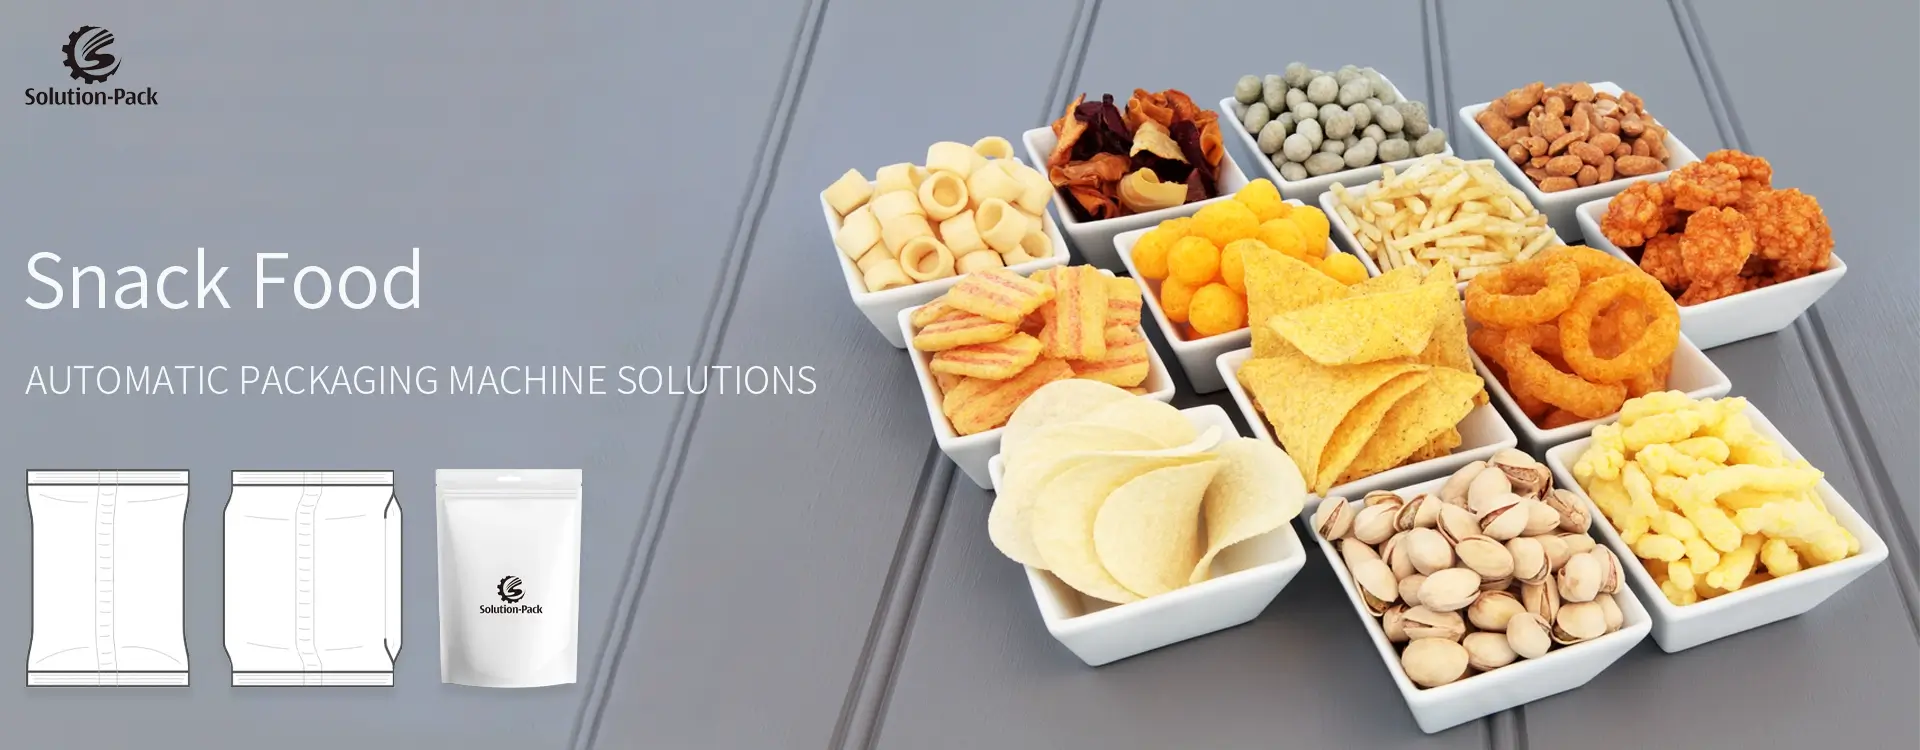 (Solution-Pack) Snack Food Automatic Packaging Machine Solutions Heading Banner Picture